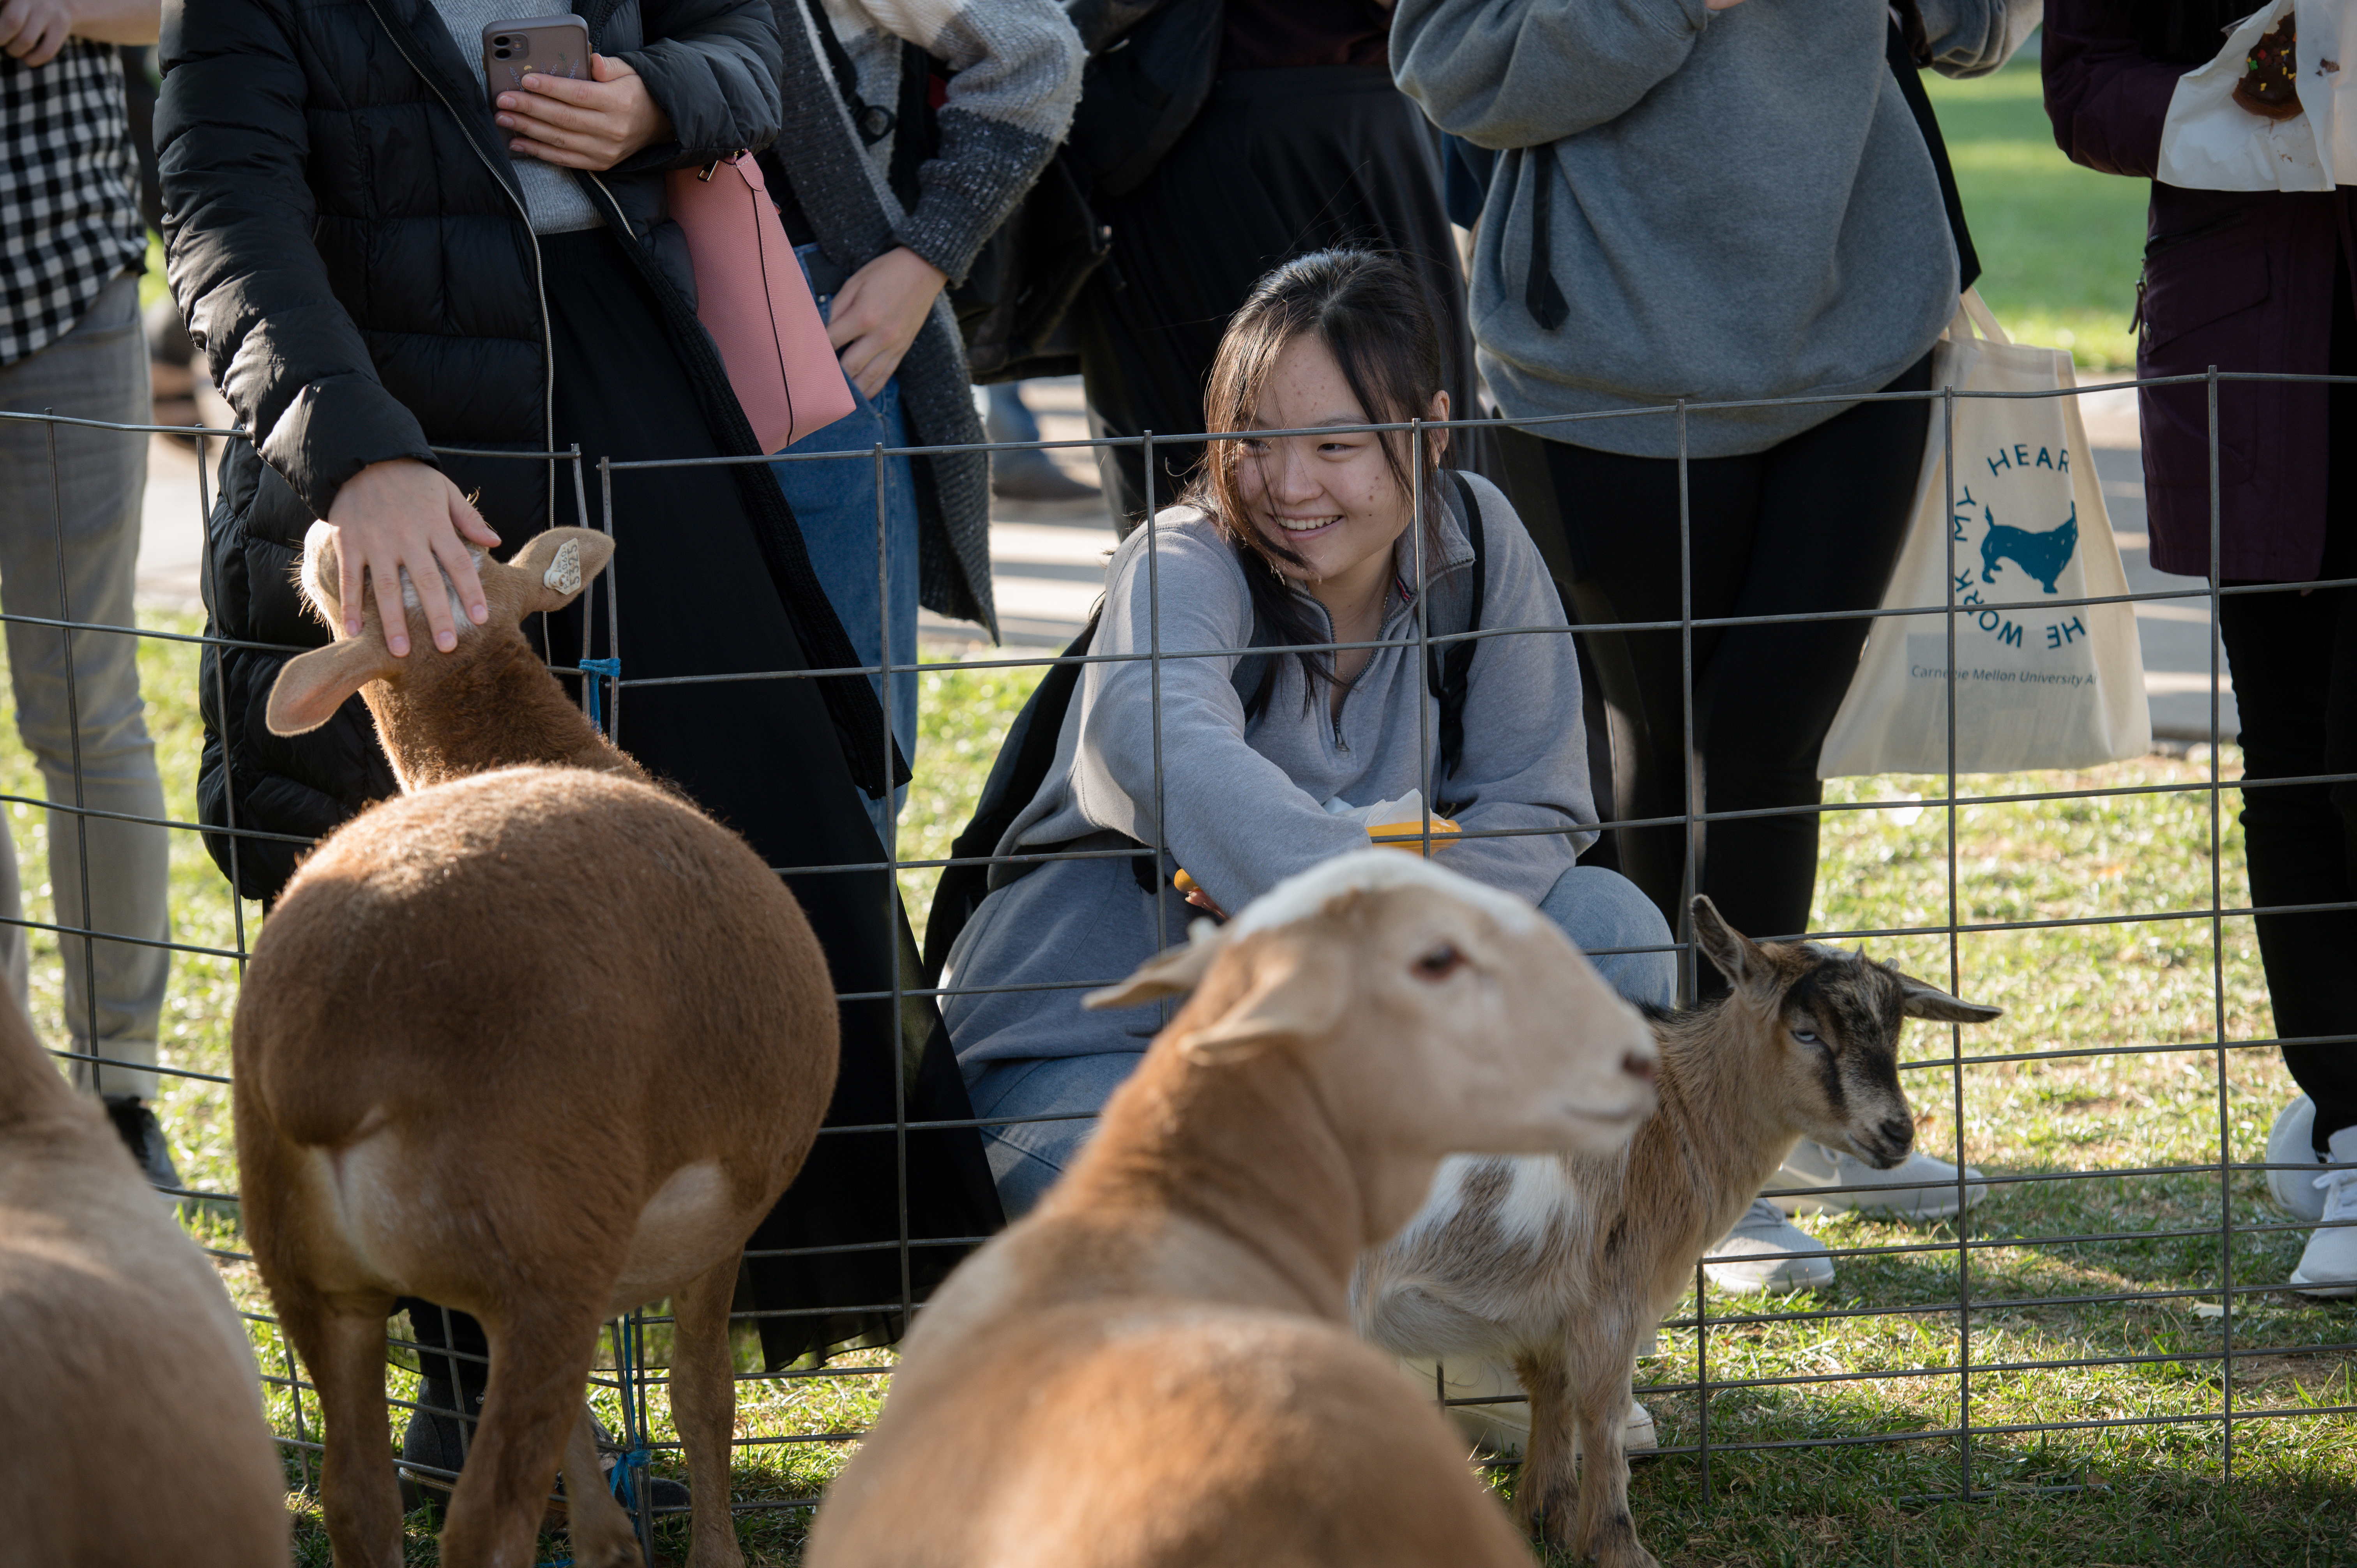 photo of CMU student and guests at a petting zoo